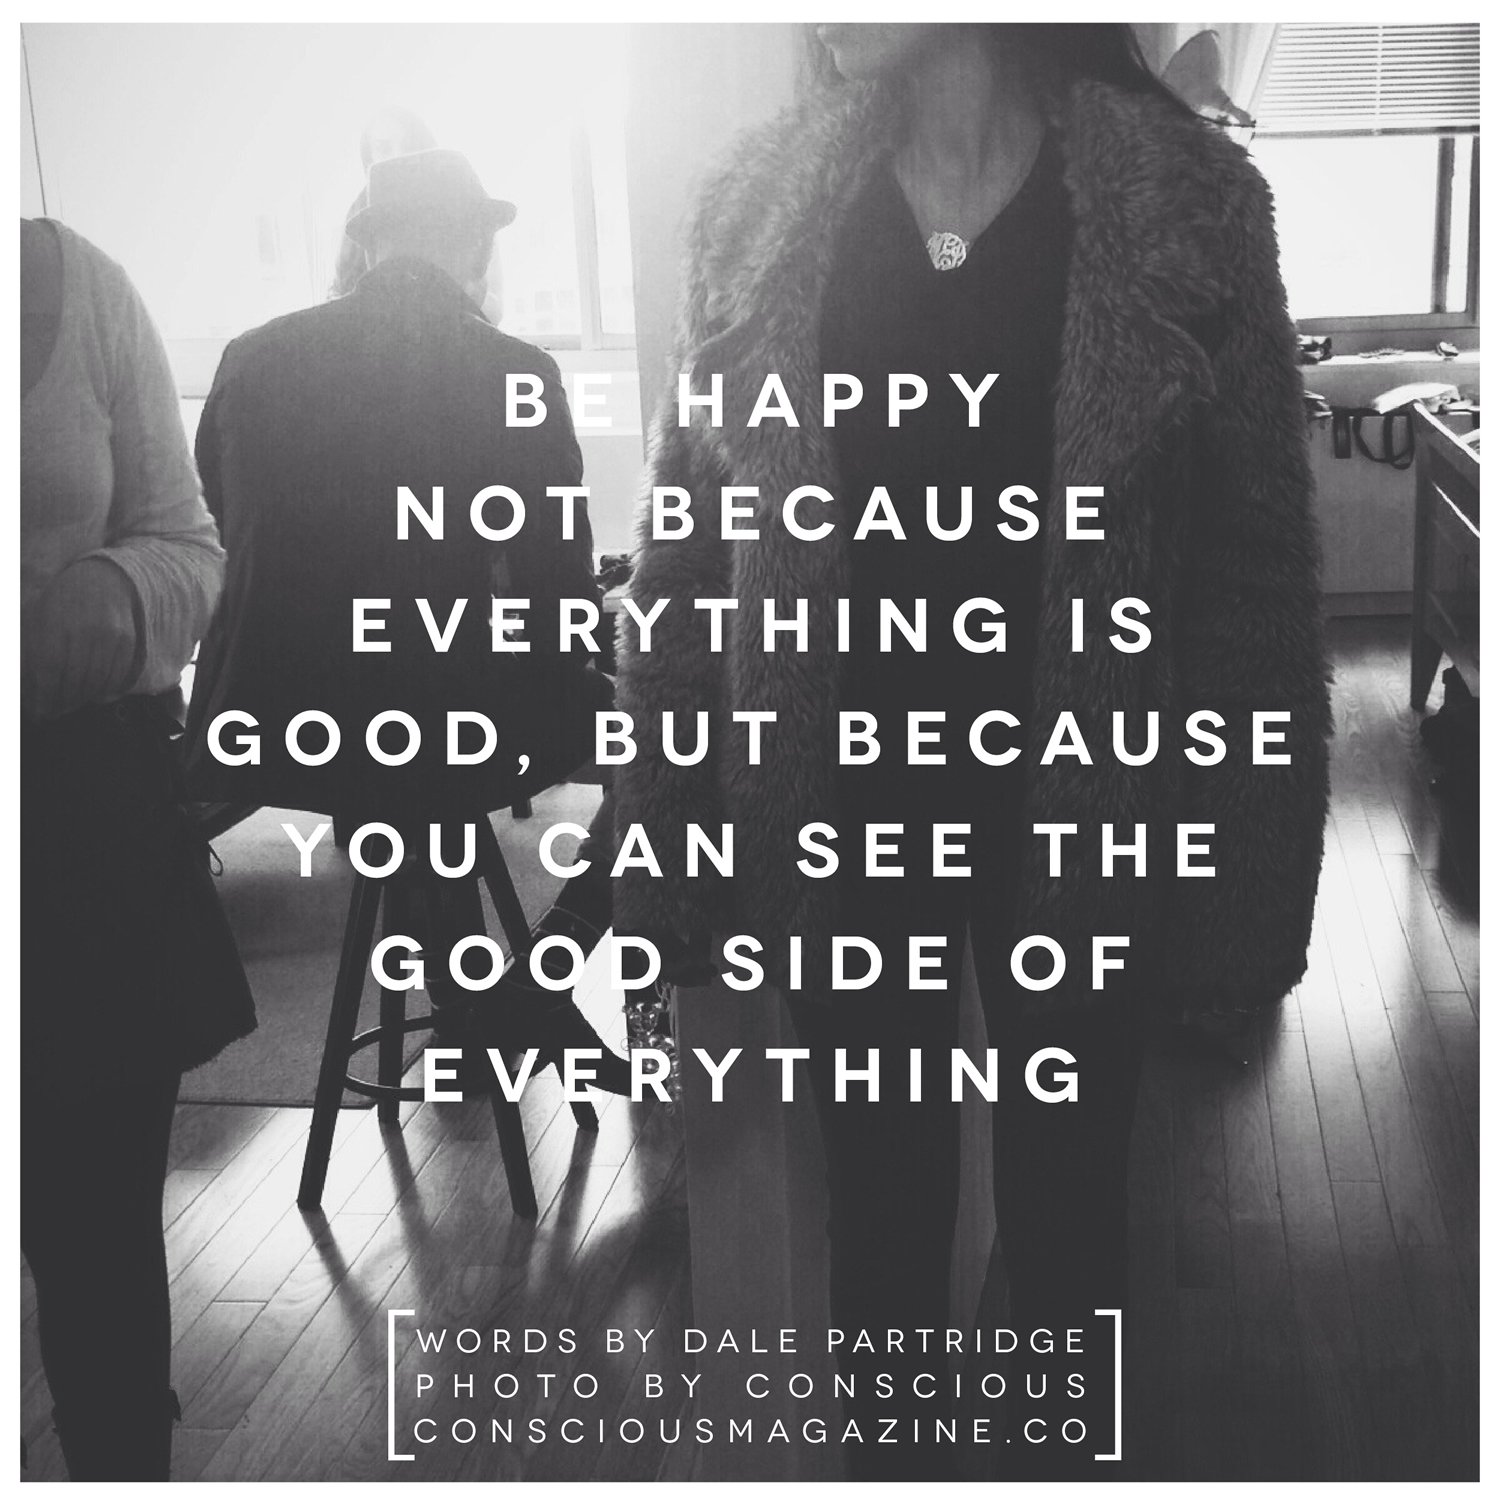 Be Happy, Not Because Everything Is Good